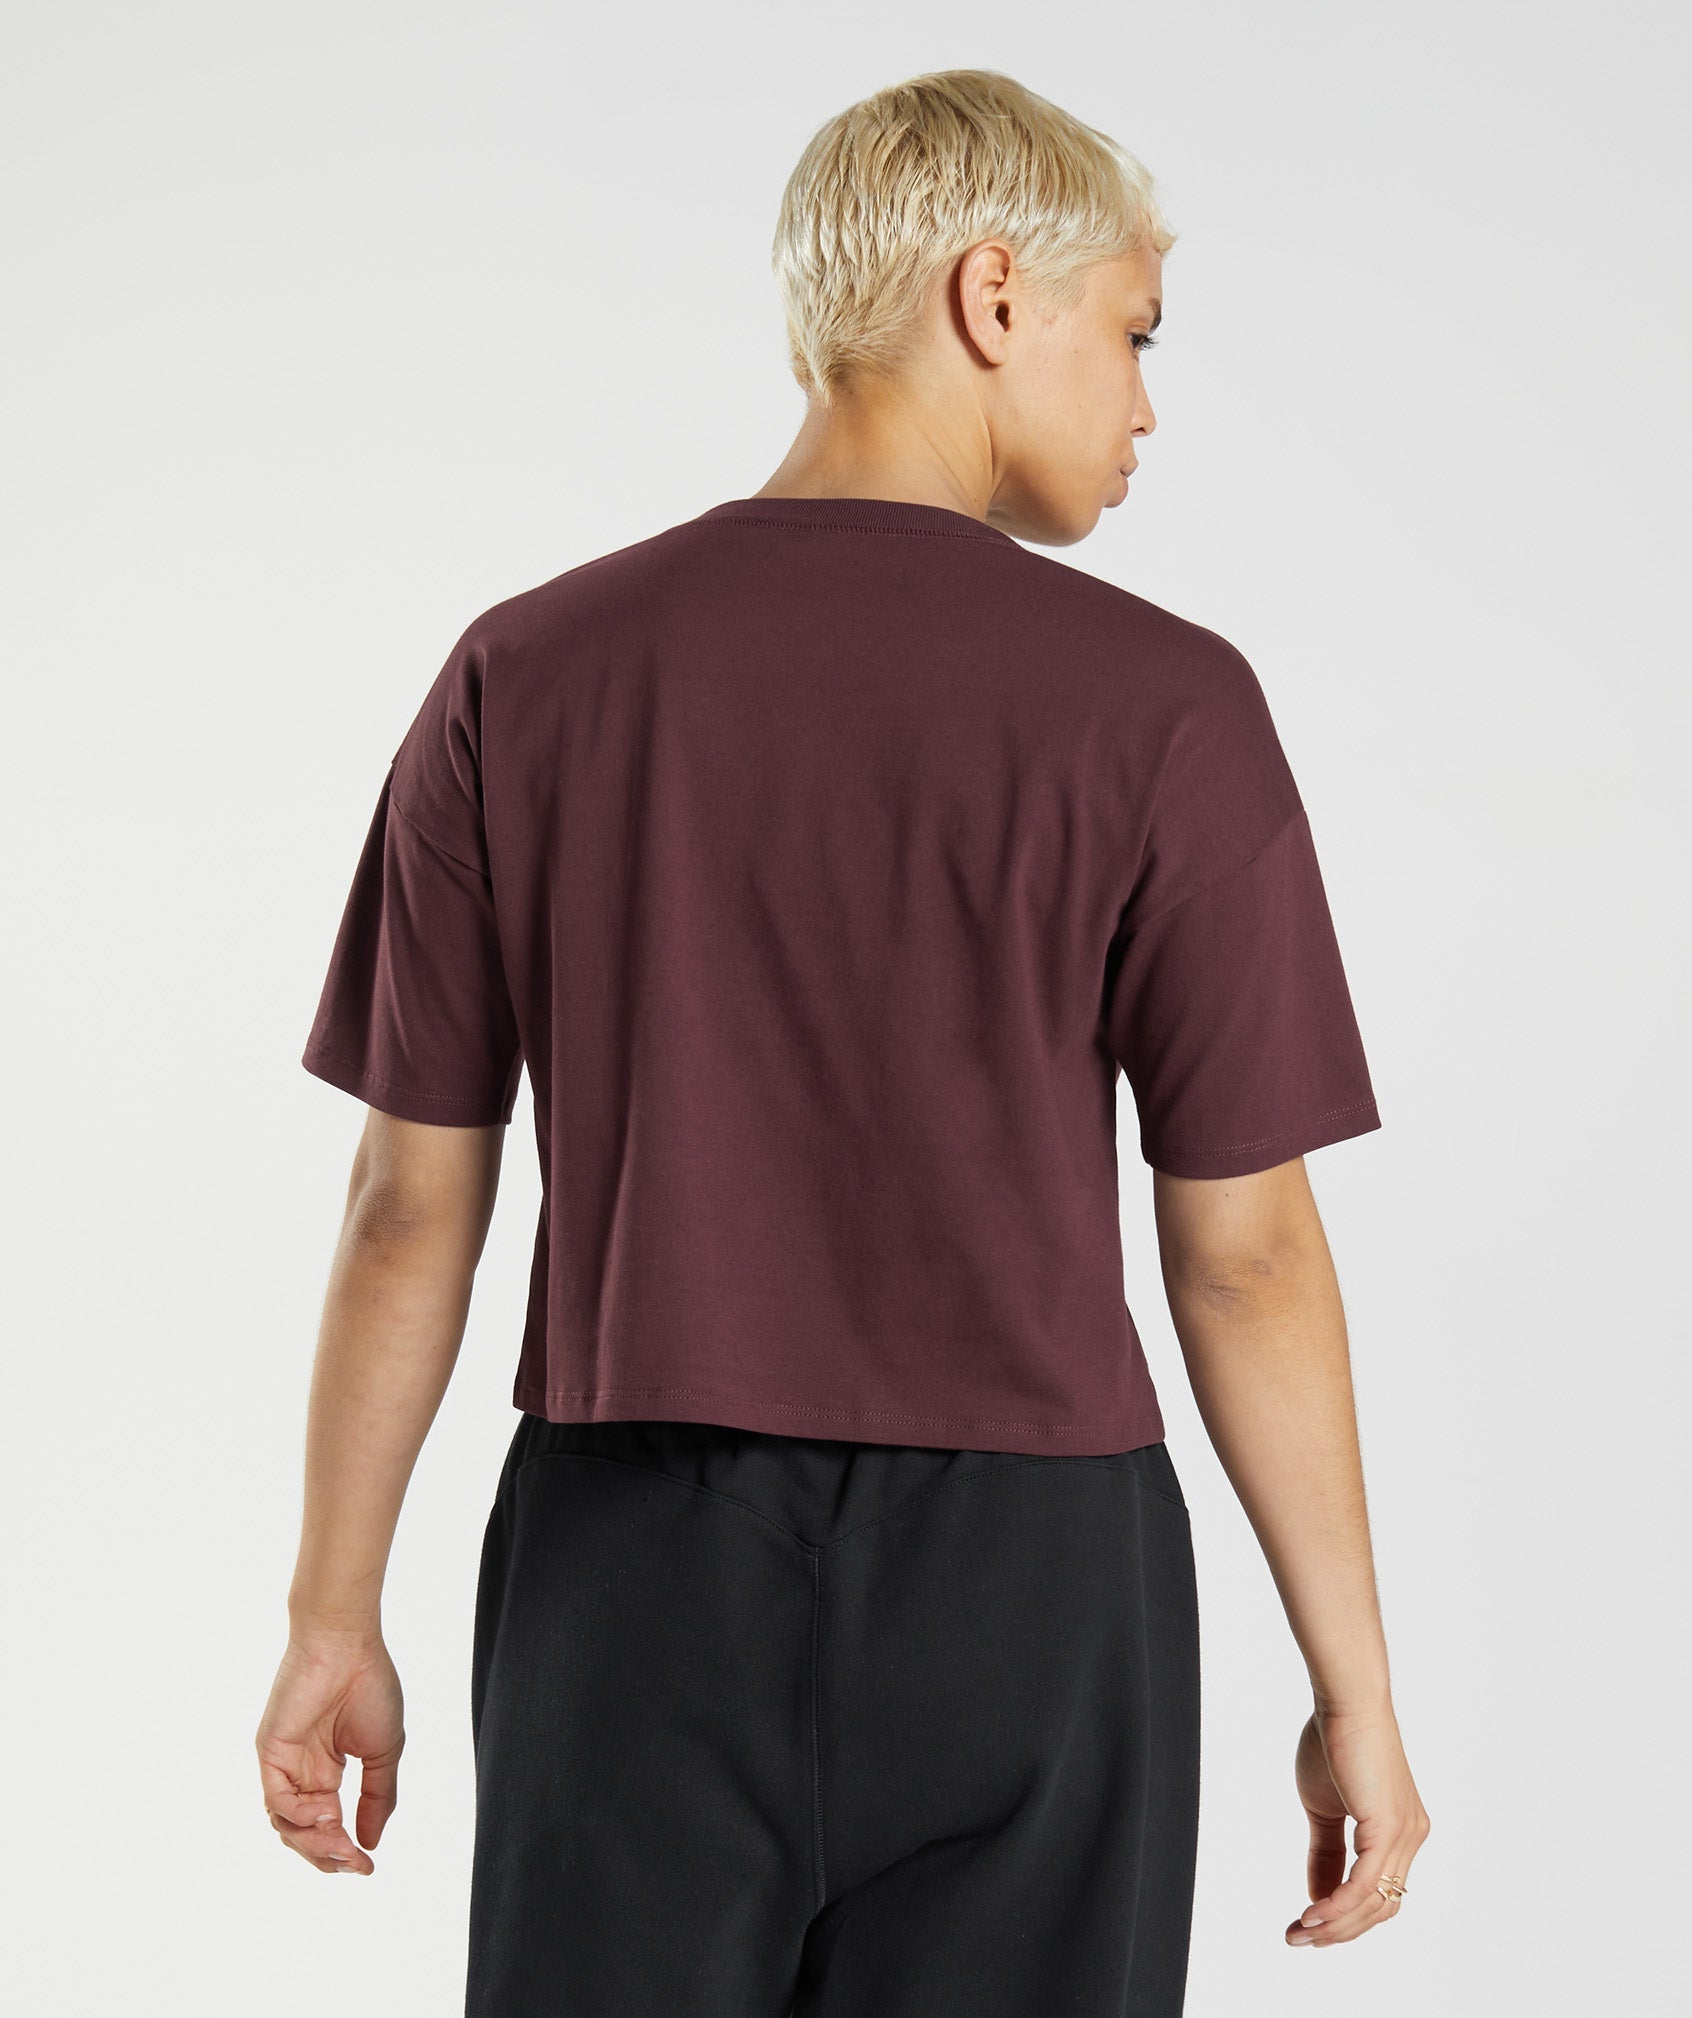 GS10 Year Midi Top in Baked Maroon - view 2